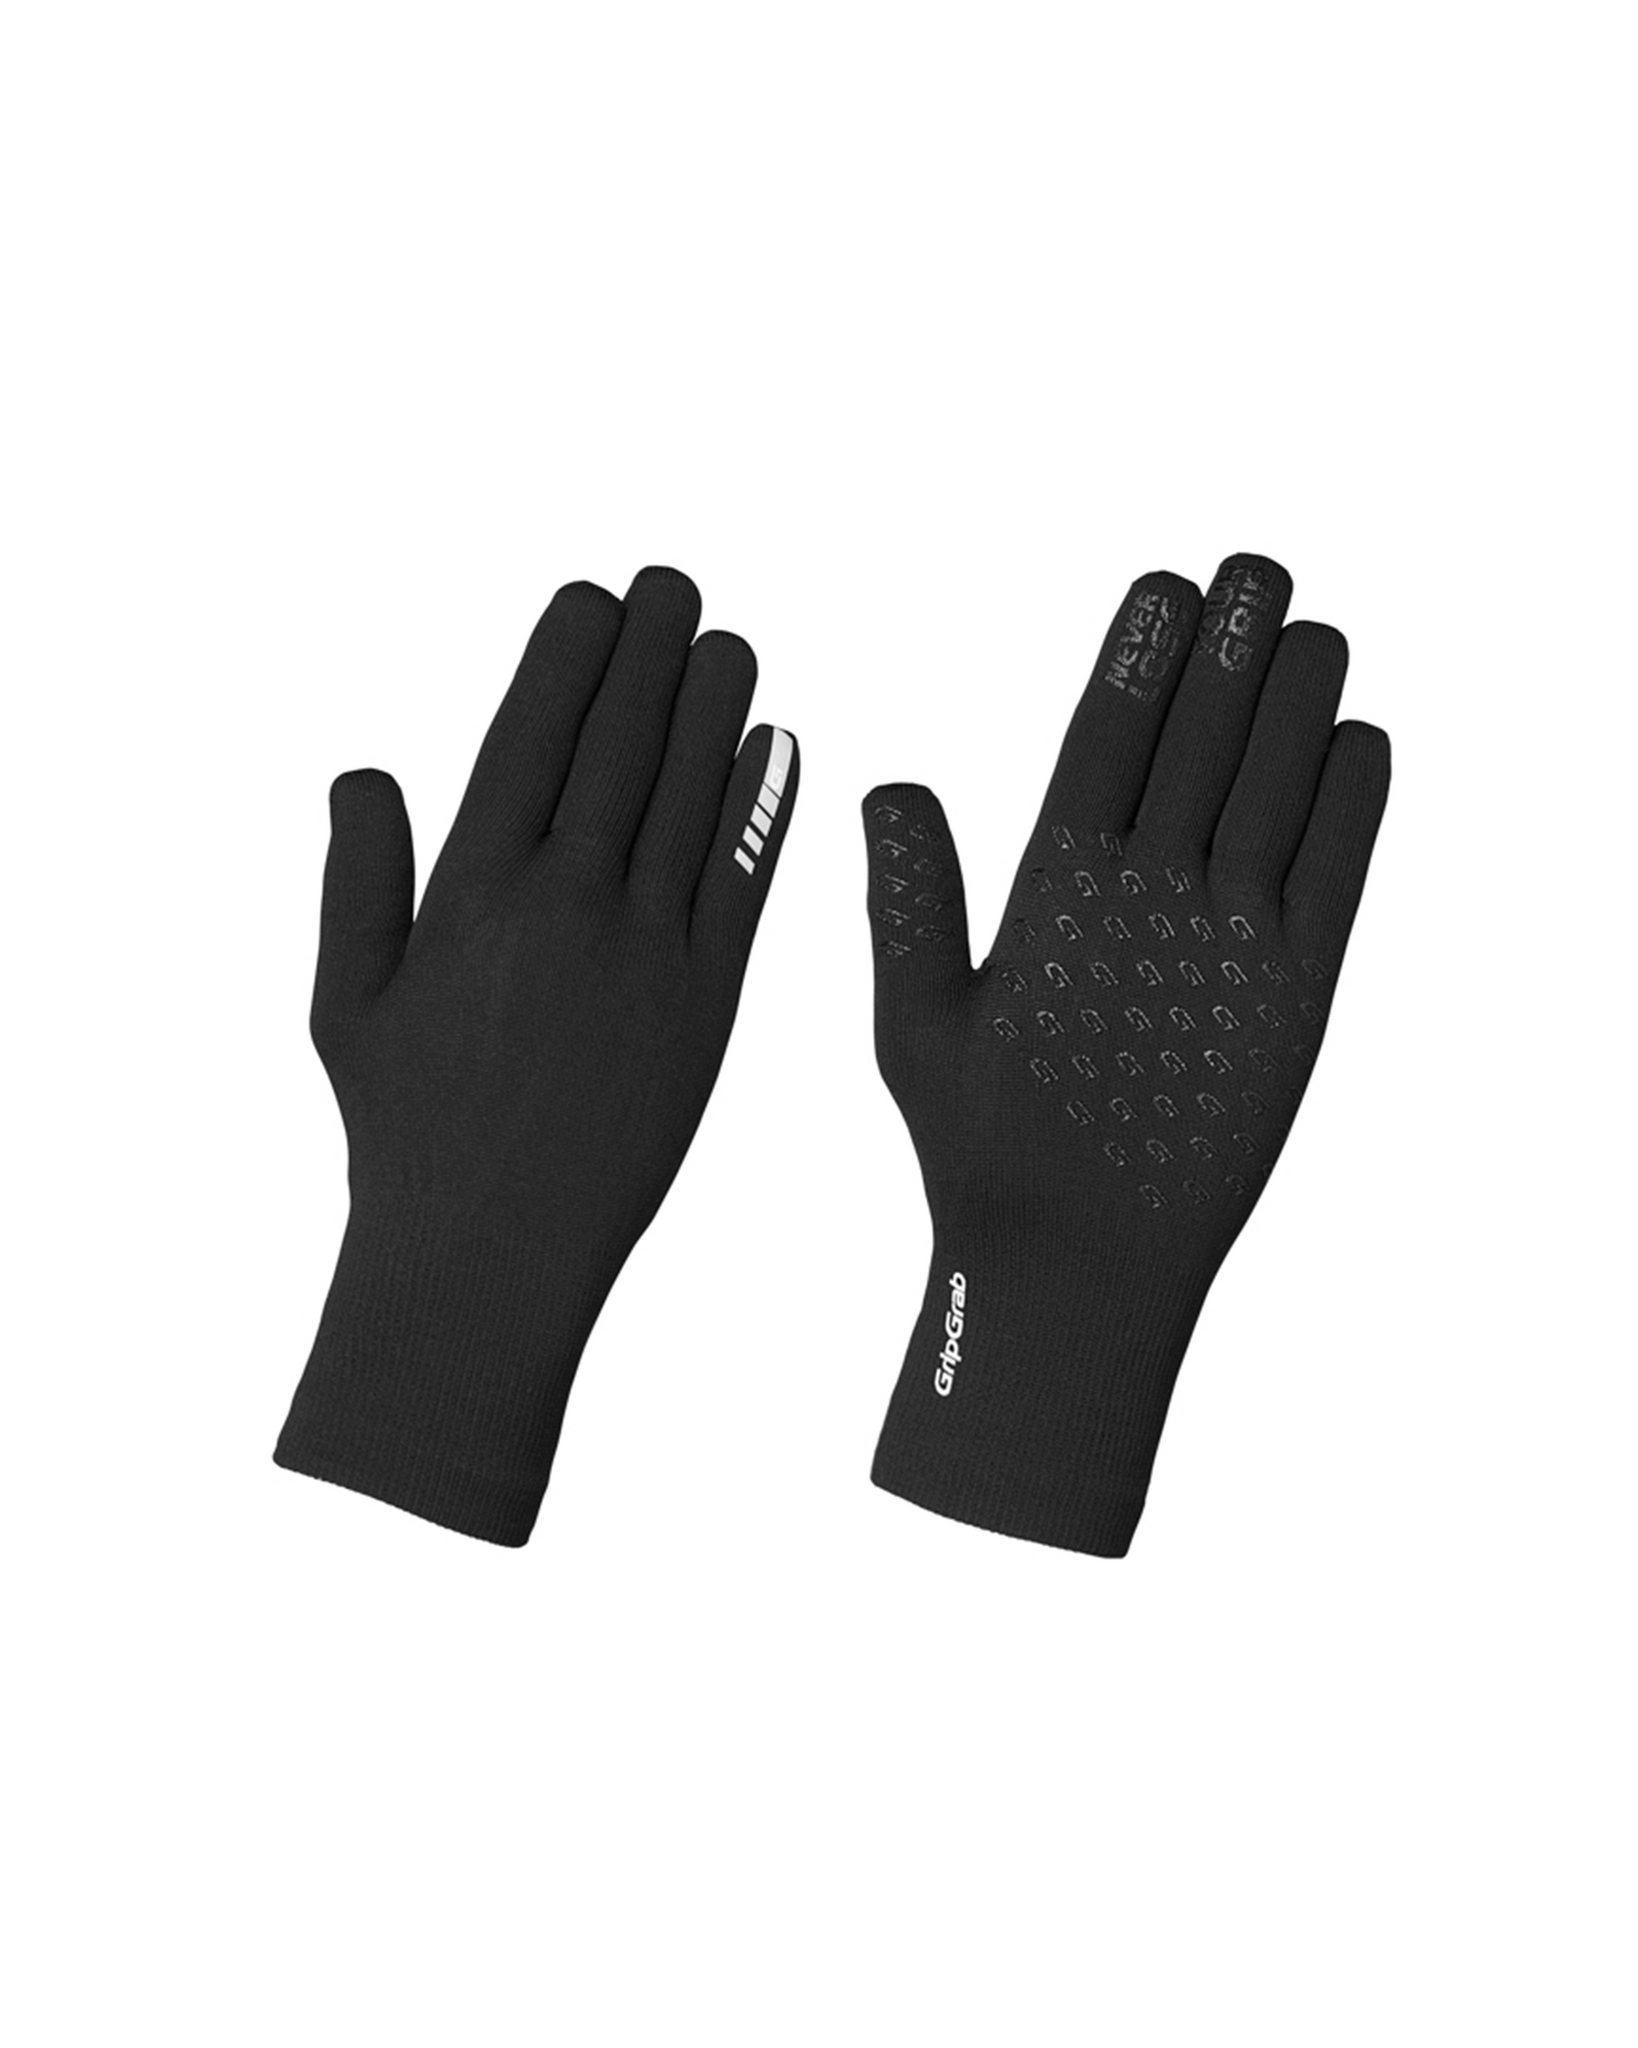 GripGrab Waterproof Knitted Thermal Gloves